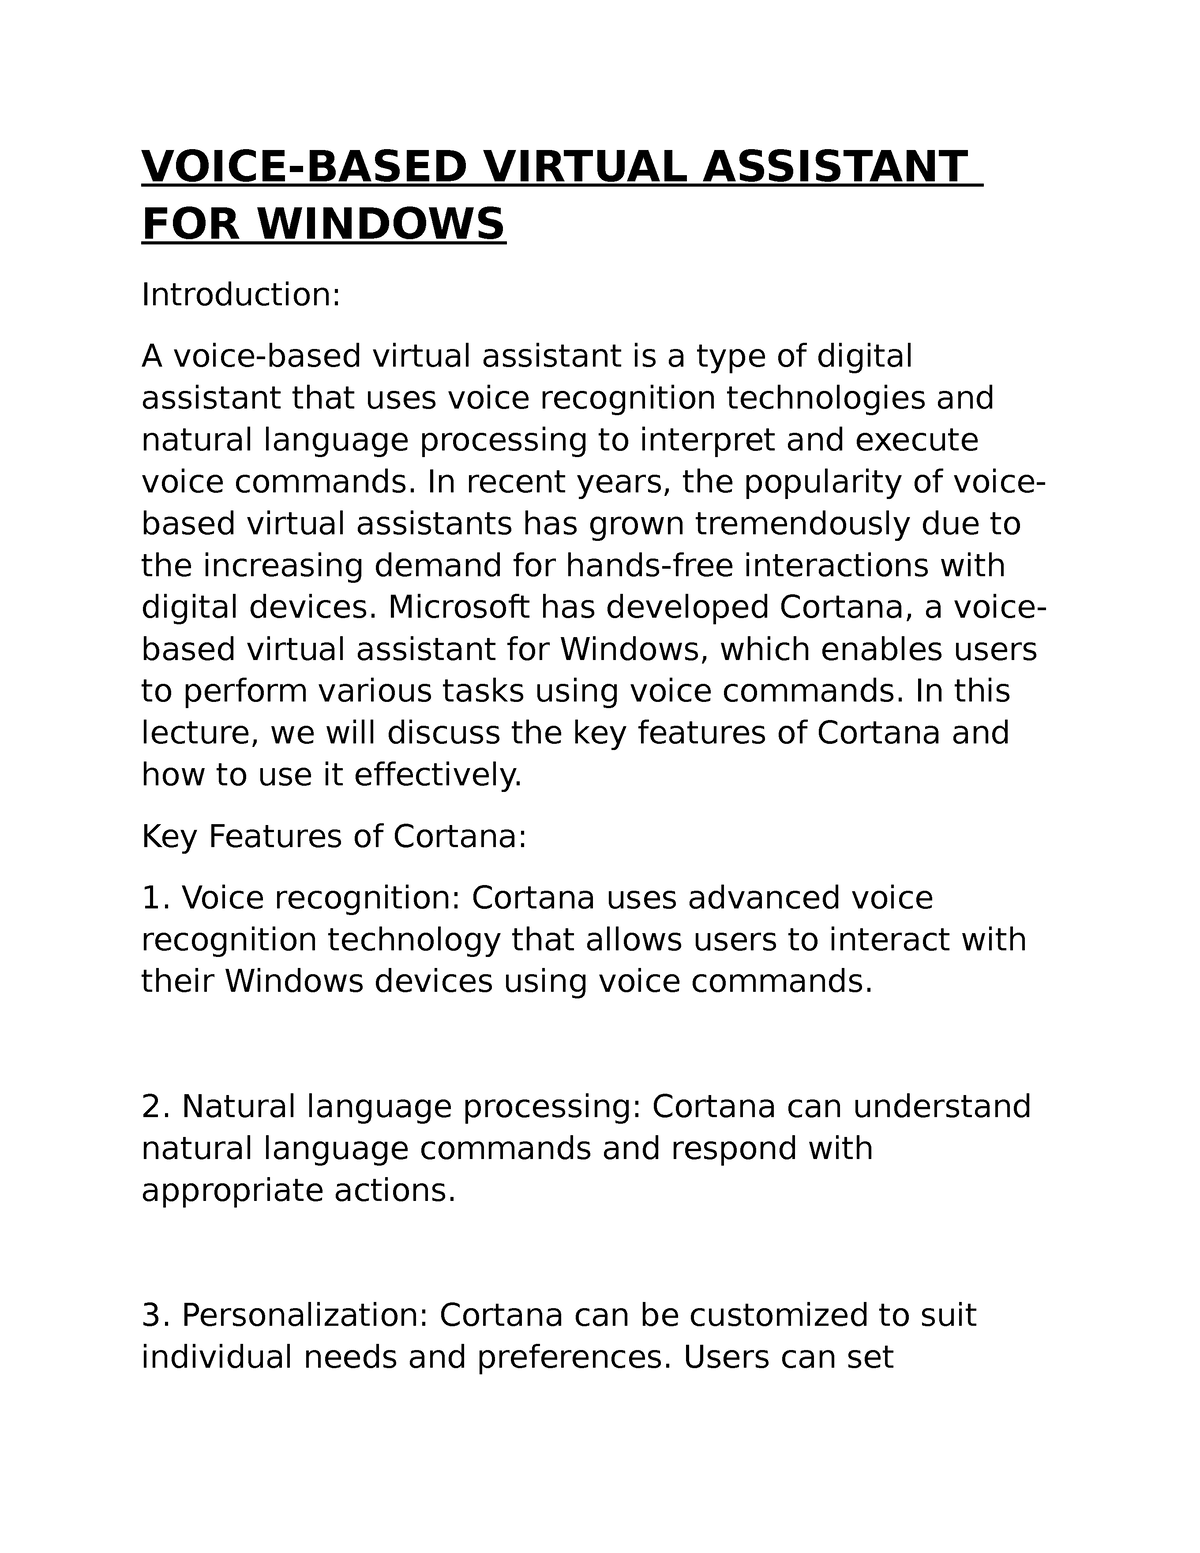 voice based virtual assistant for windows research paper